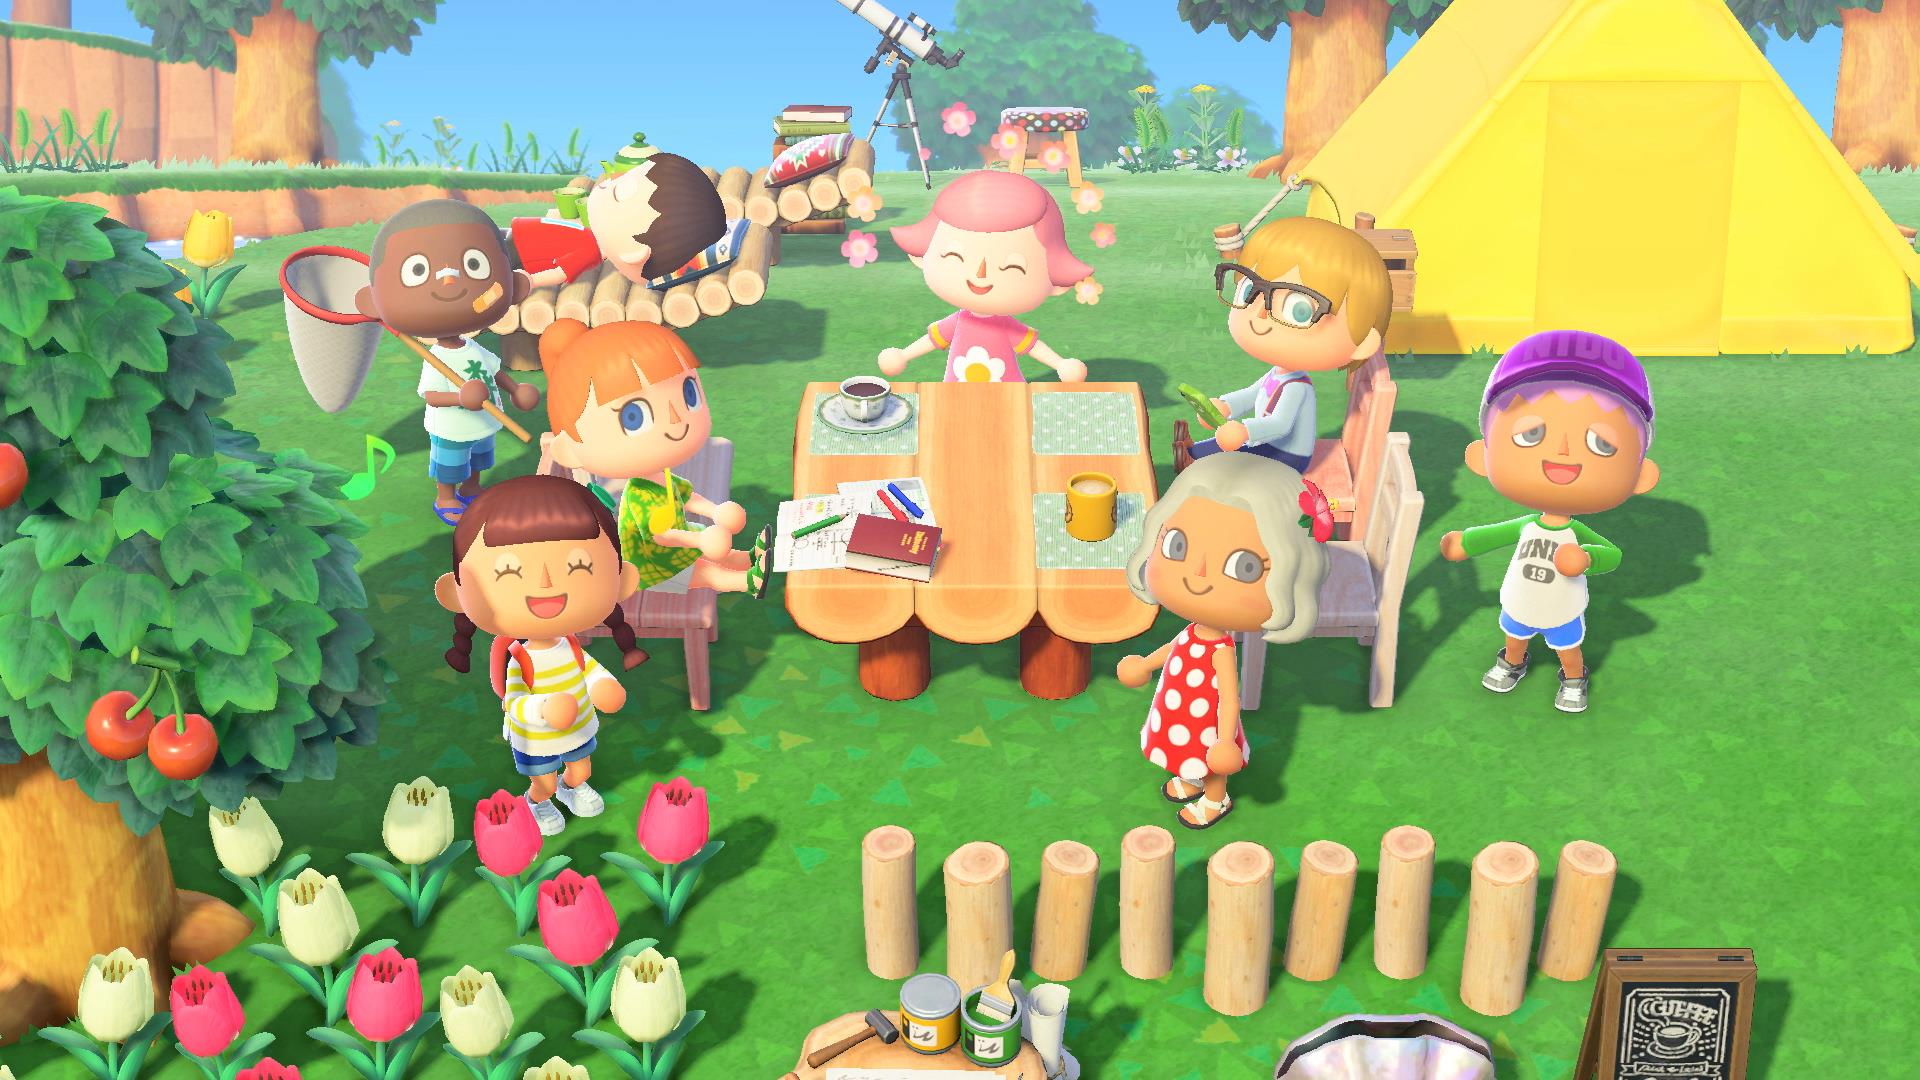 As much as I love it, Animal Crossing: New Horizons is a dead end